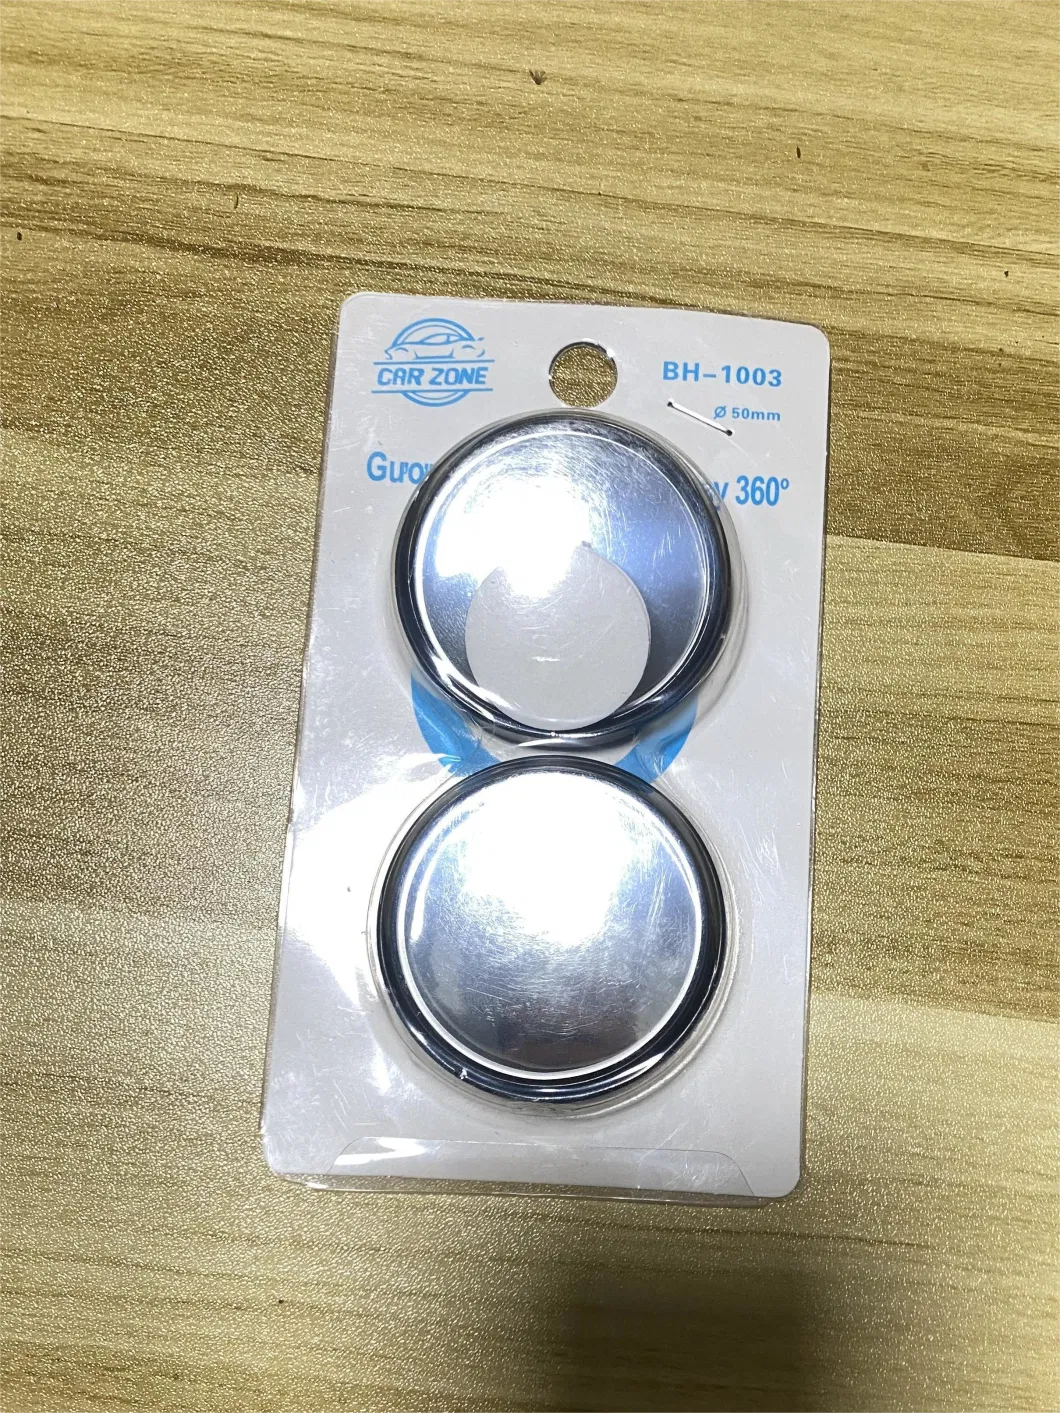 360-Degree Wide Angle Blind Spot Round Side Rearview Auciliary Mirror Movable Convex Small Round Mirror for Car